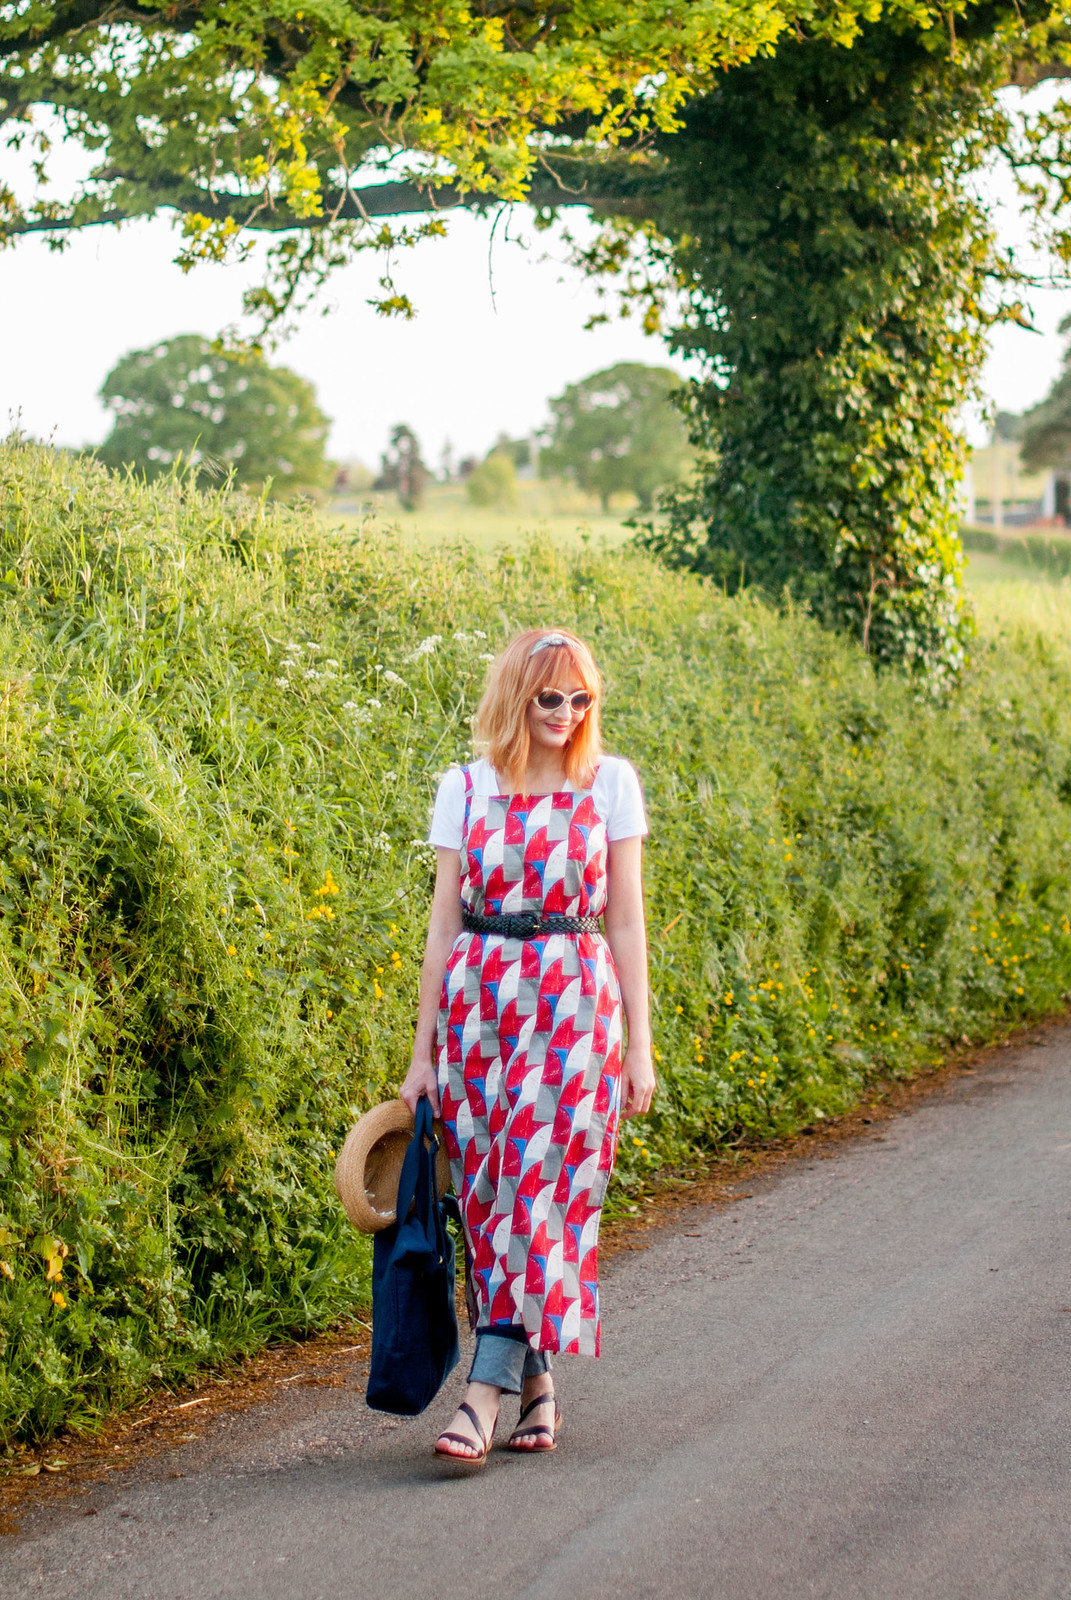 Summer dressing: Strappy printed maxi dress over jeans and white t-shirt retro styling preppy style | Not Dressed As Lamb, over 40 blog